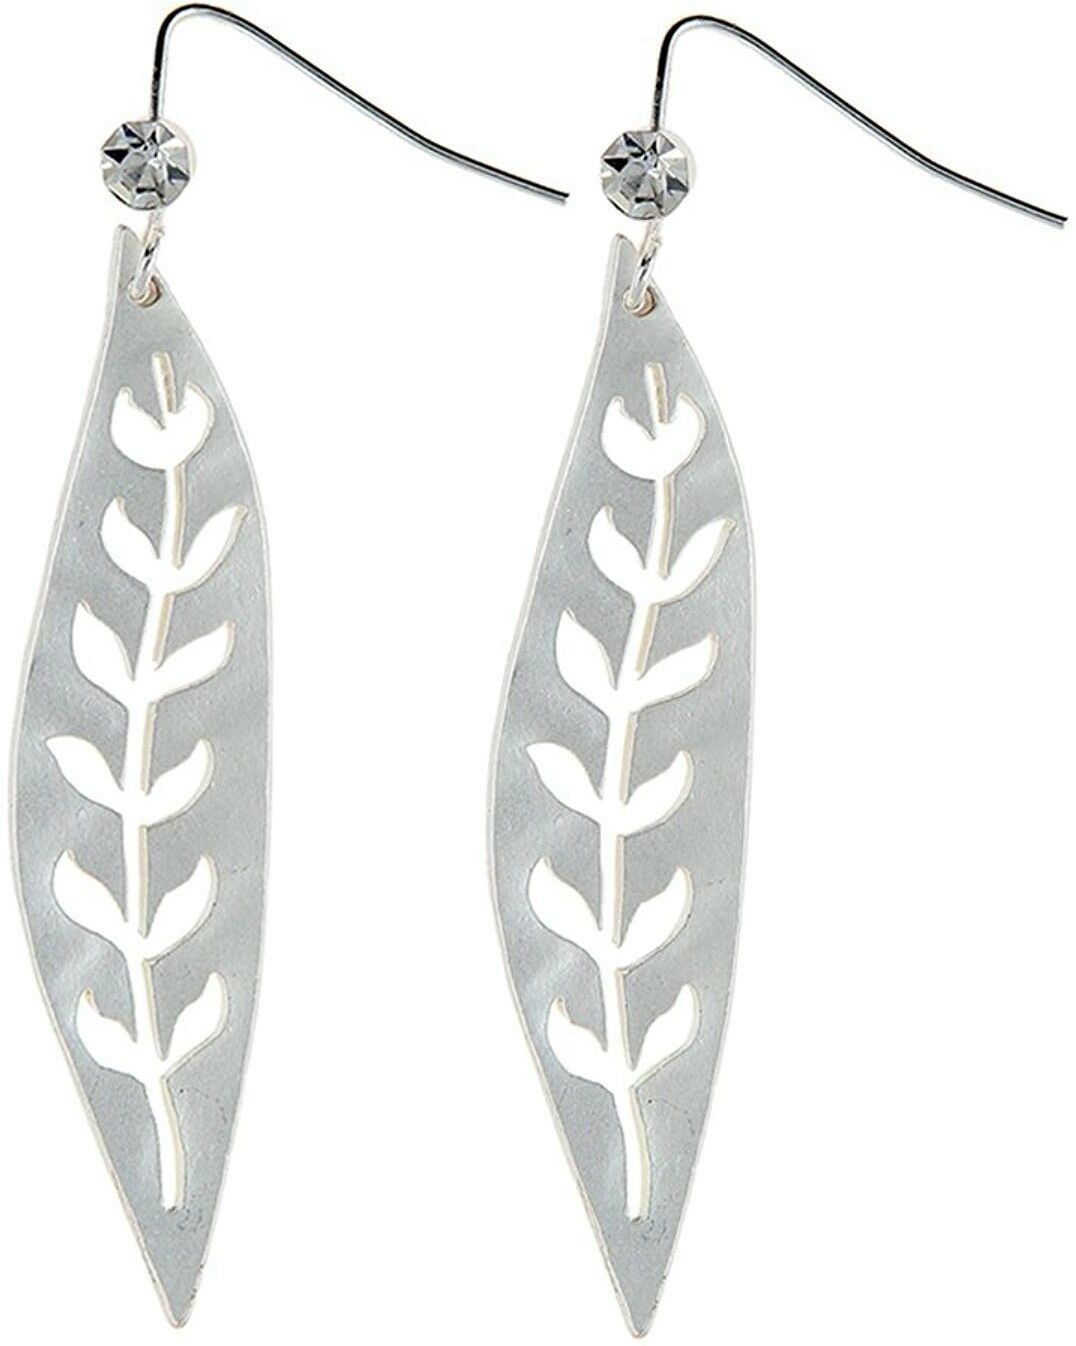 Primary image for RAIN 'Leaf' Cubic Zirconia Silver-Tone Fish Hook Dangle Earrings